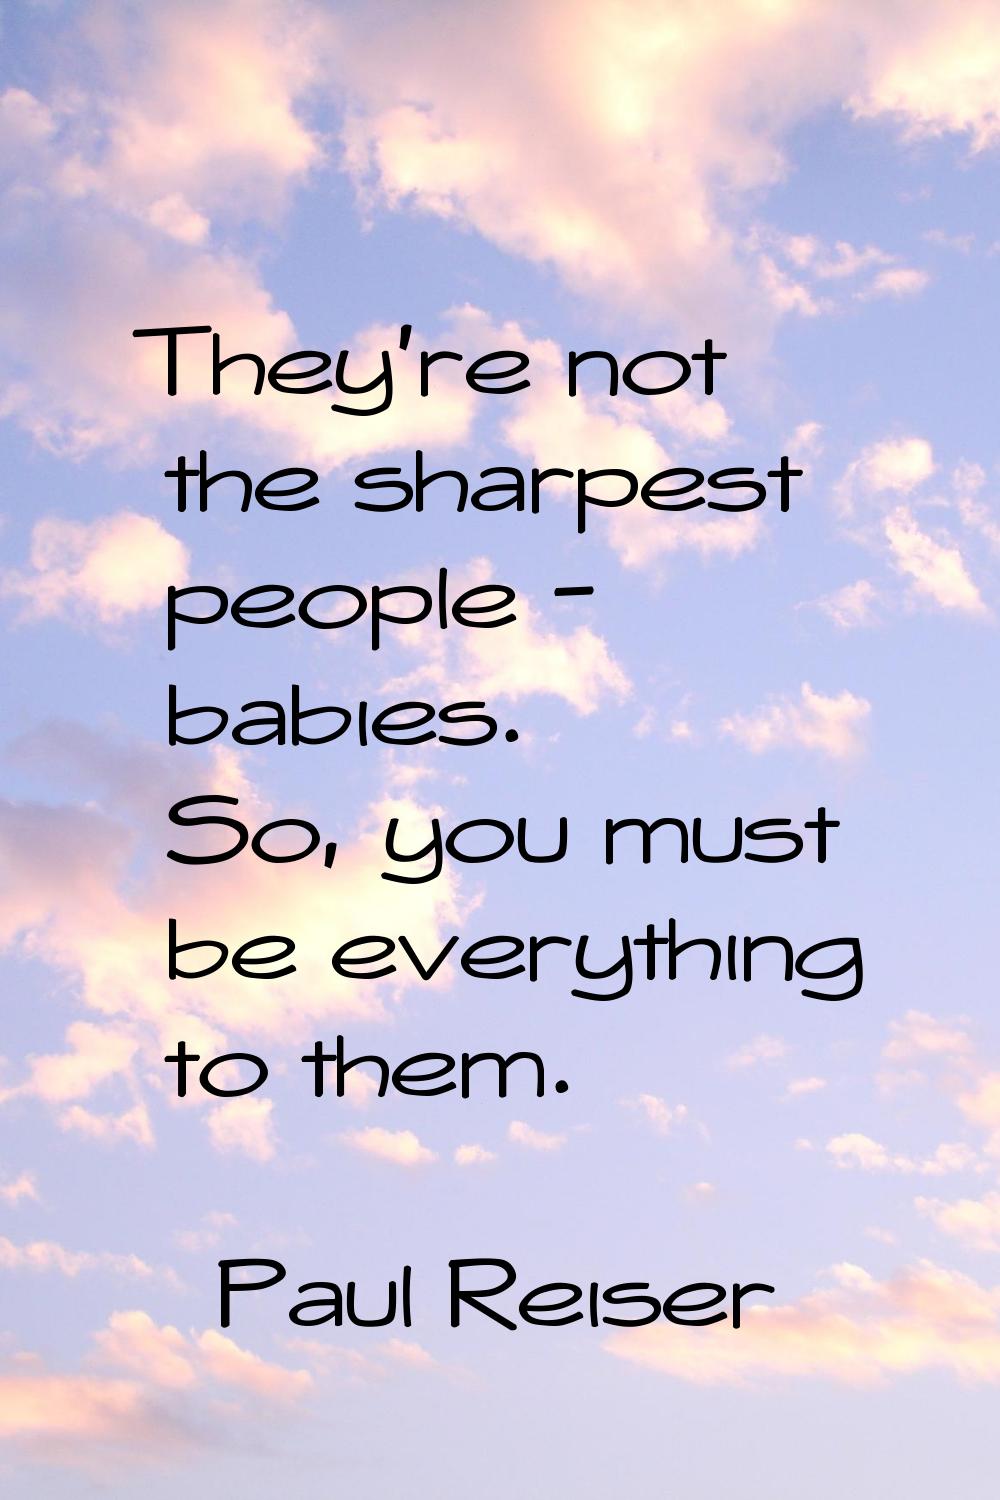 They're not the sharpest people - babies. So, you must be everything to them.